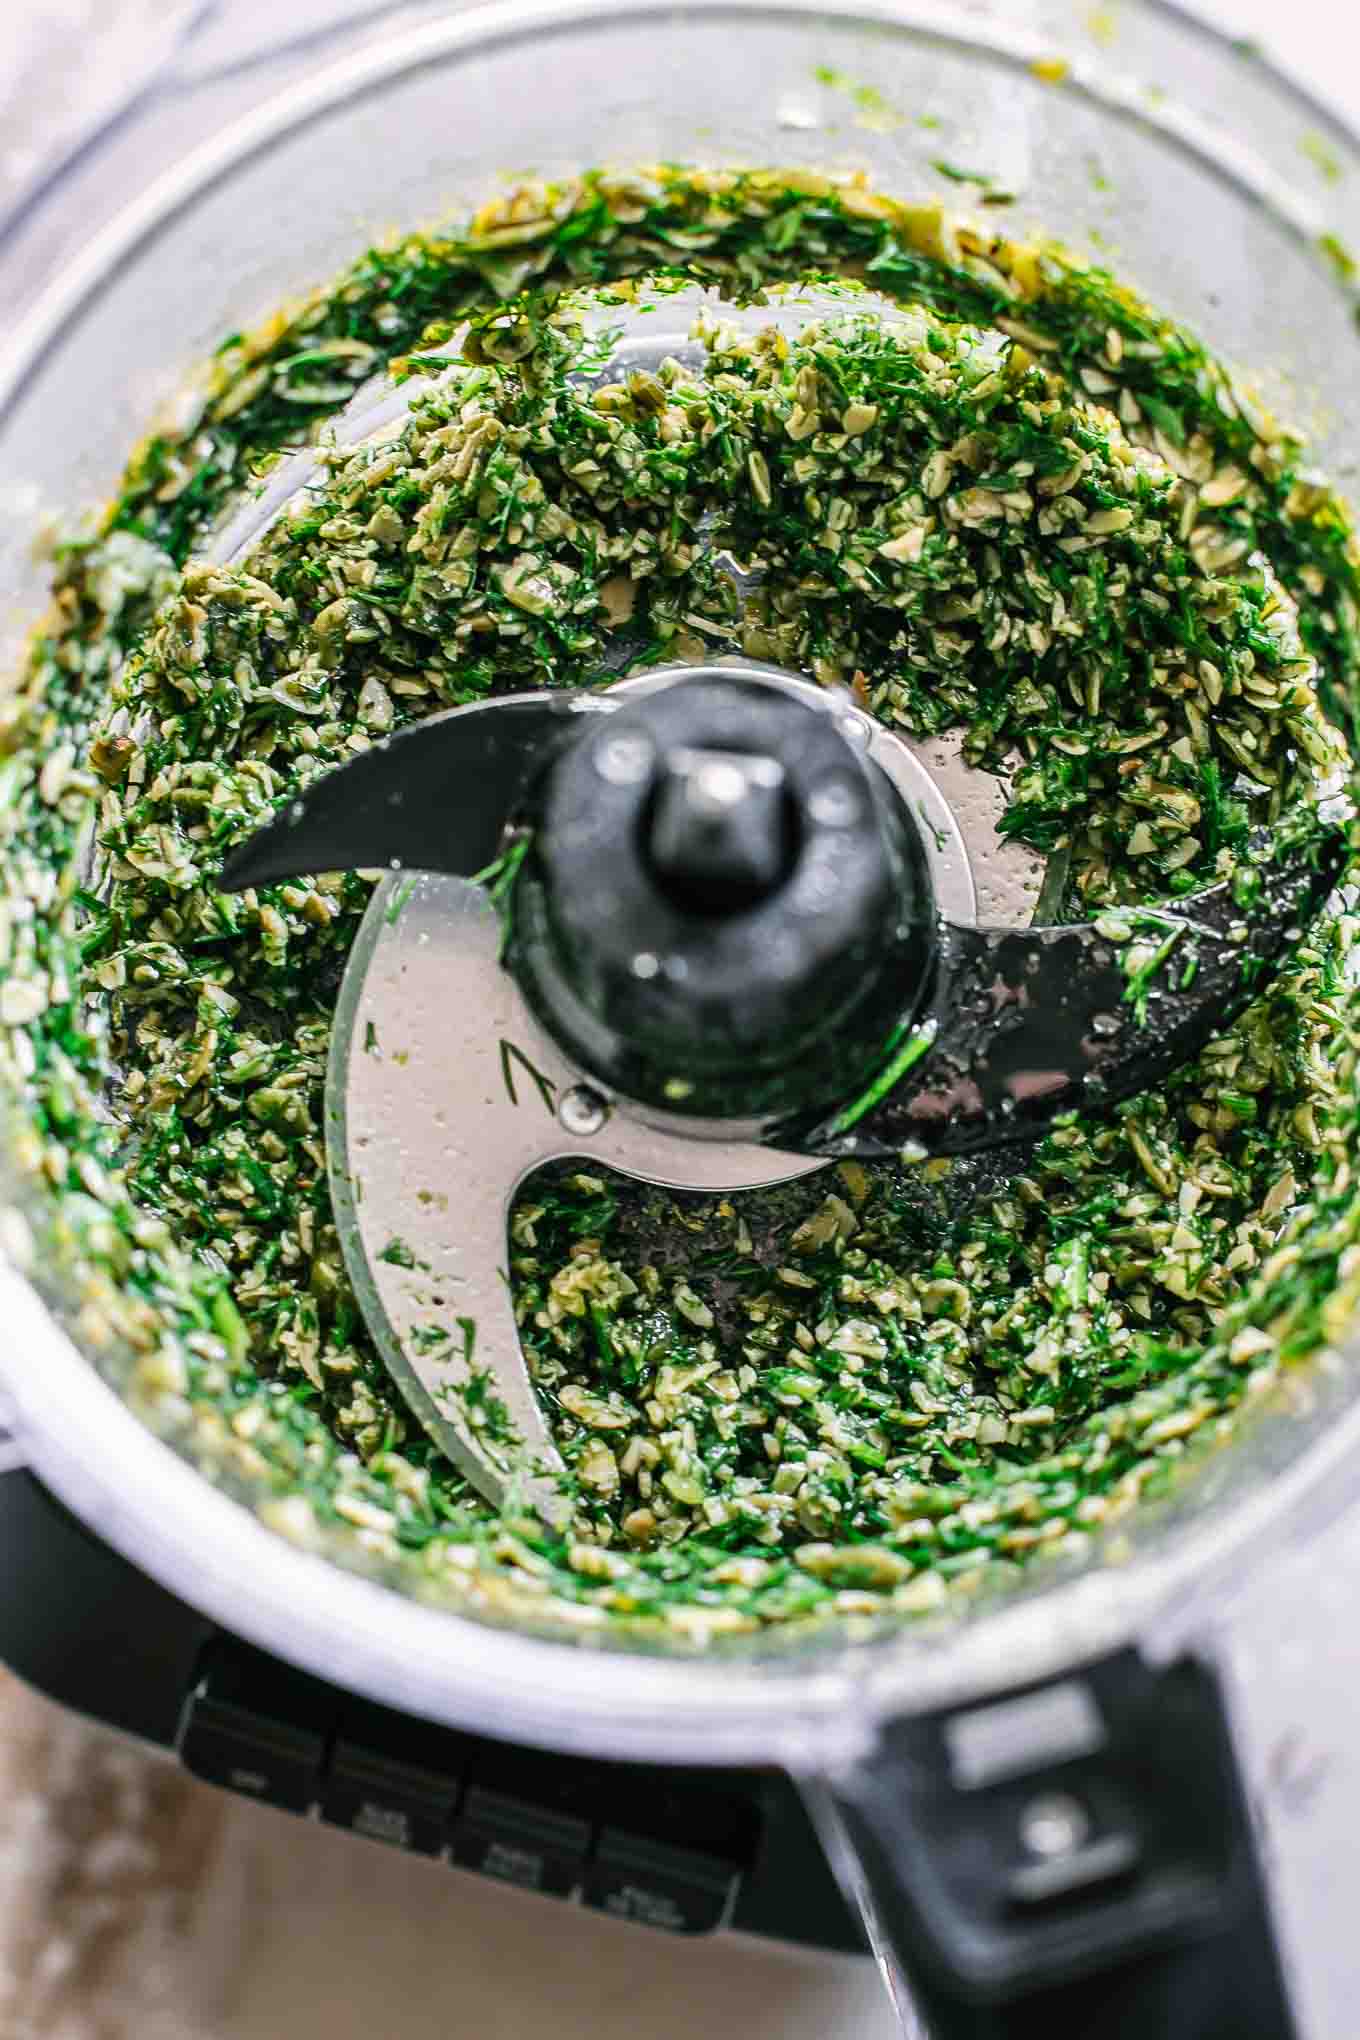 blended dill pesto sauce in a food processor